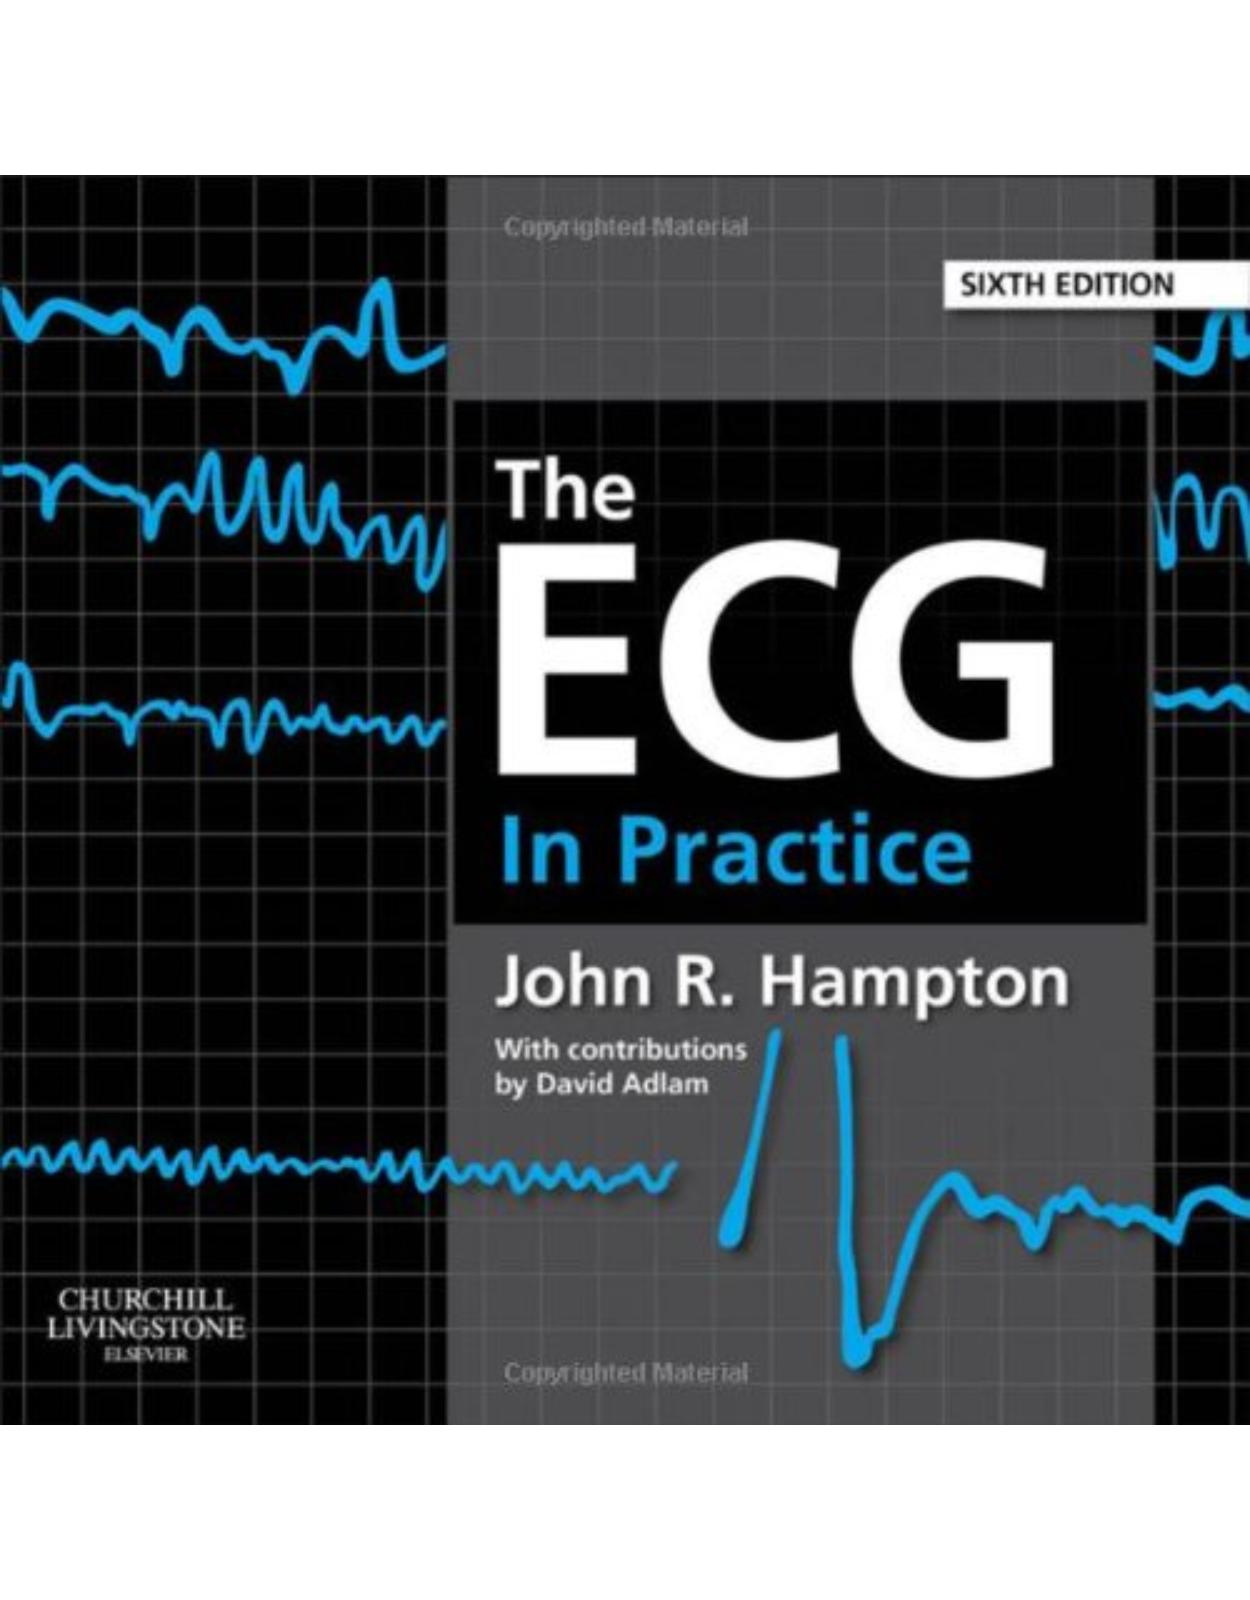 The ECG In Practice, 6th Edition